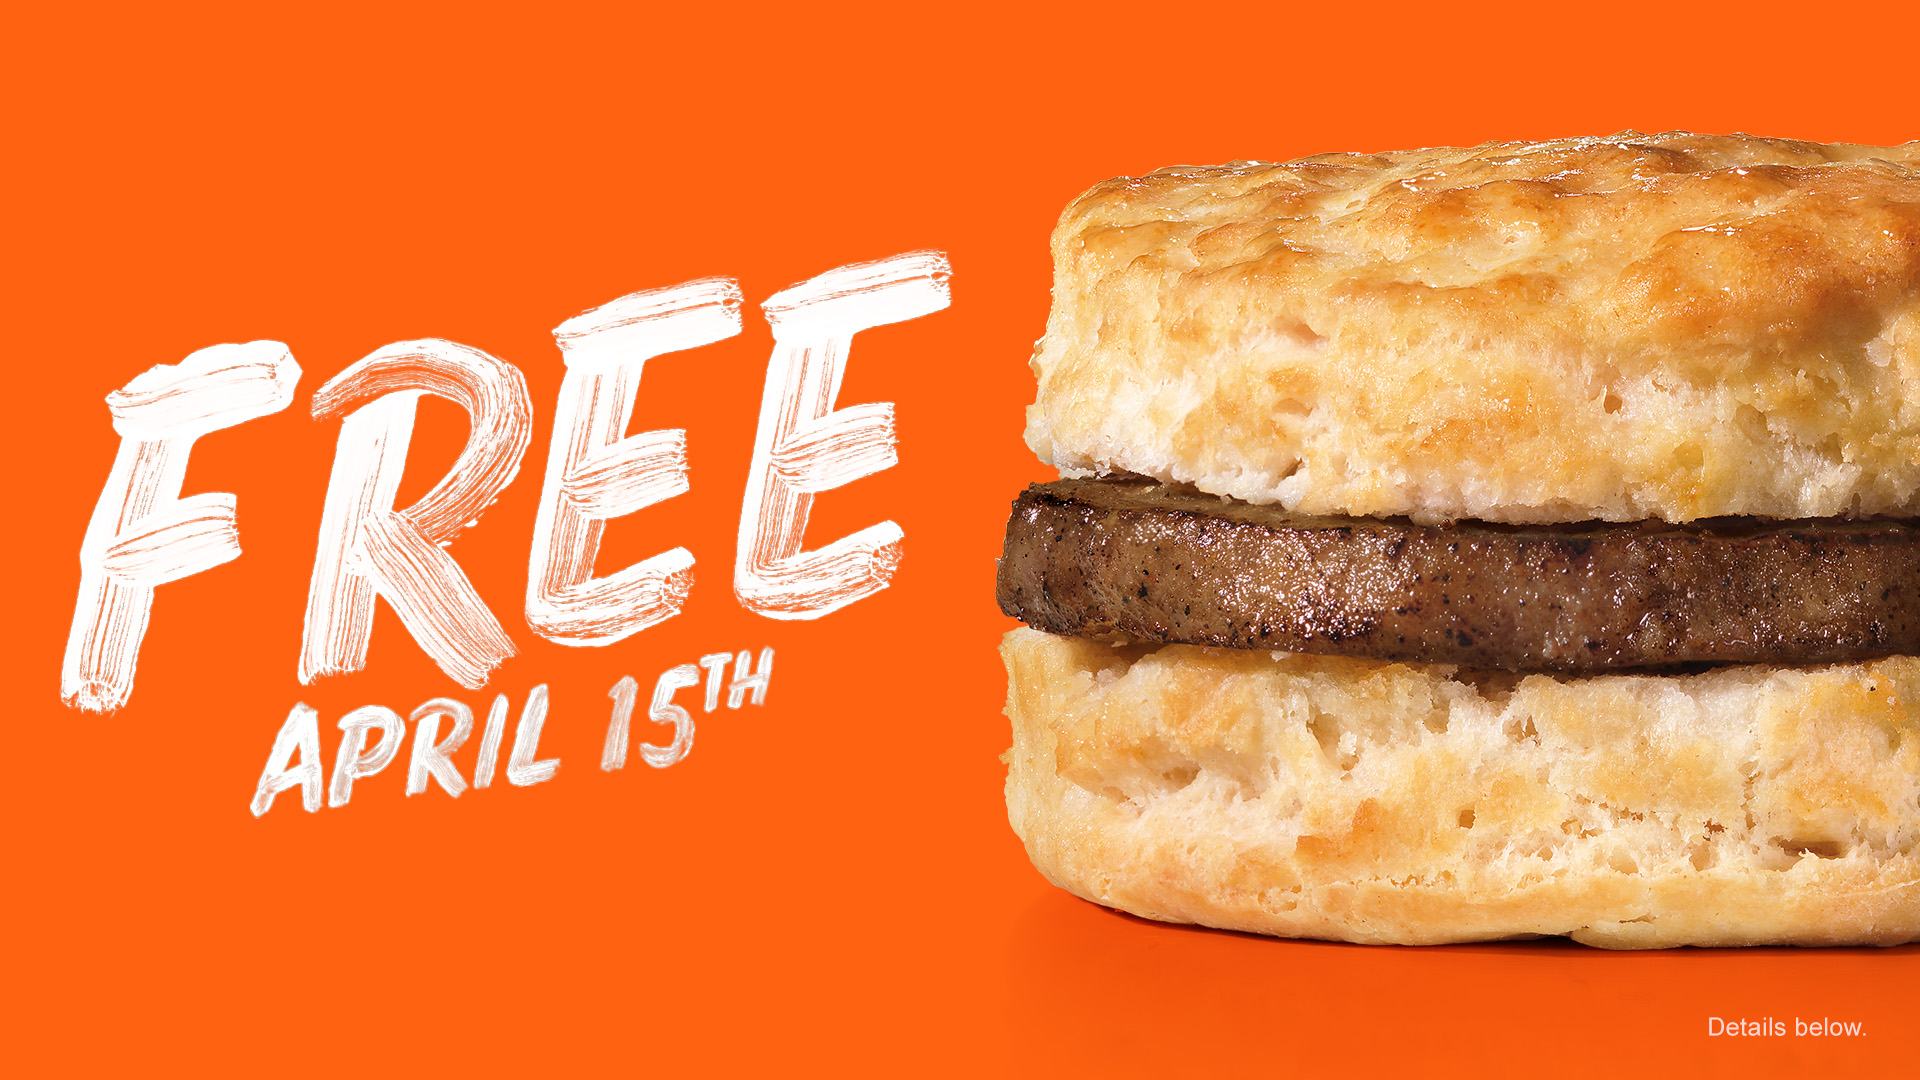 Free Hardee’s Sausage Biscuit on April 15th!